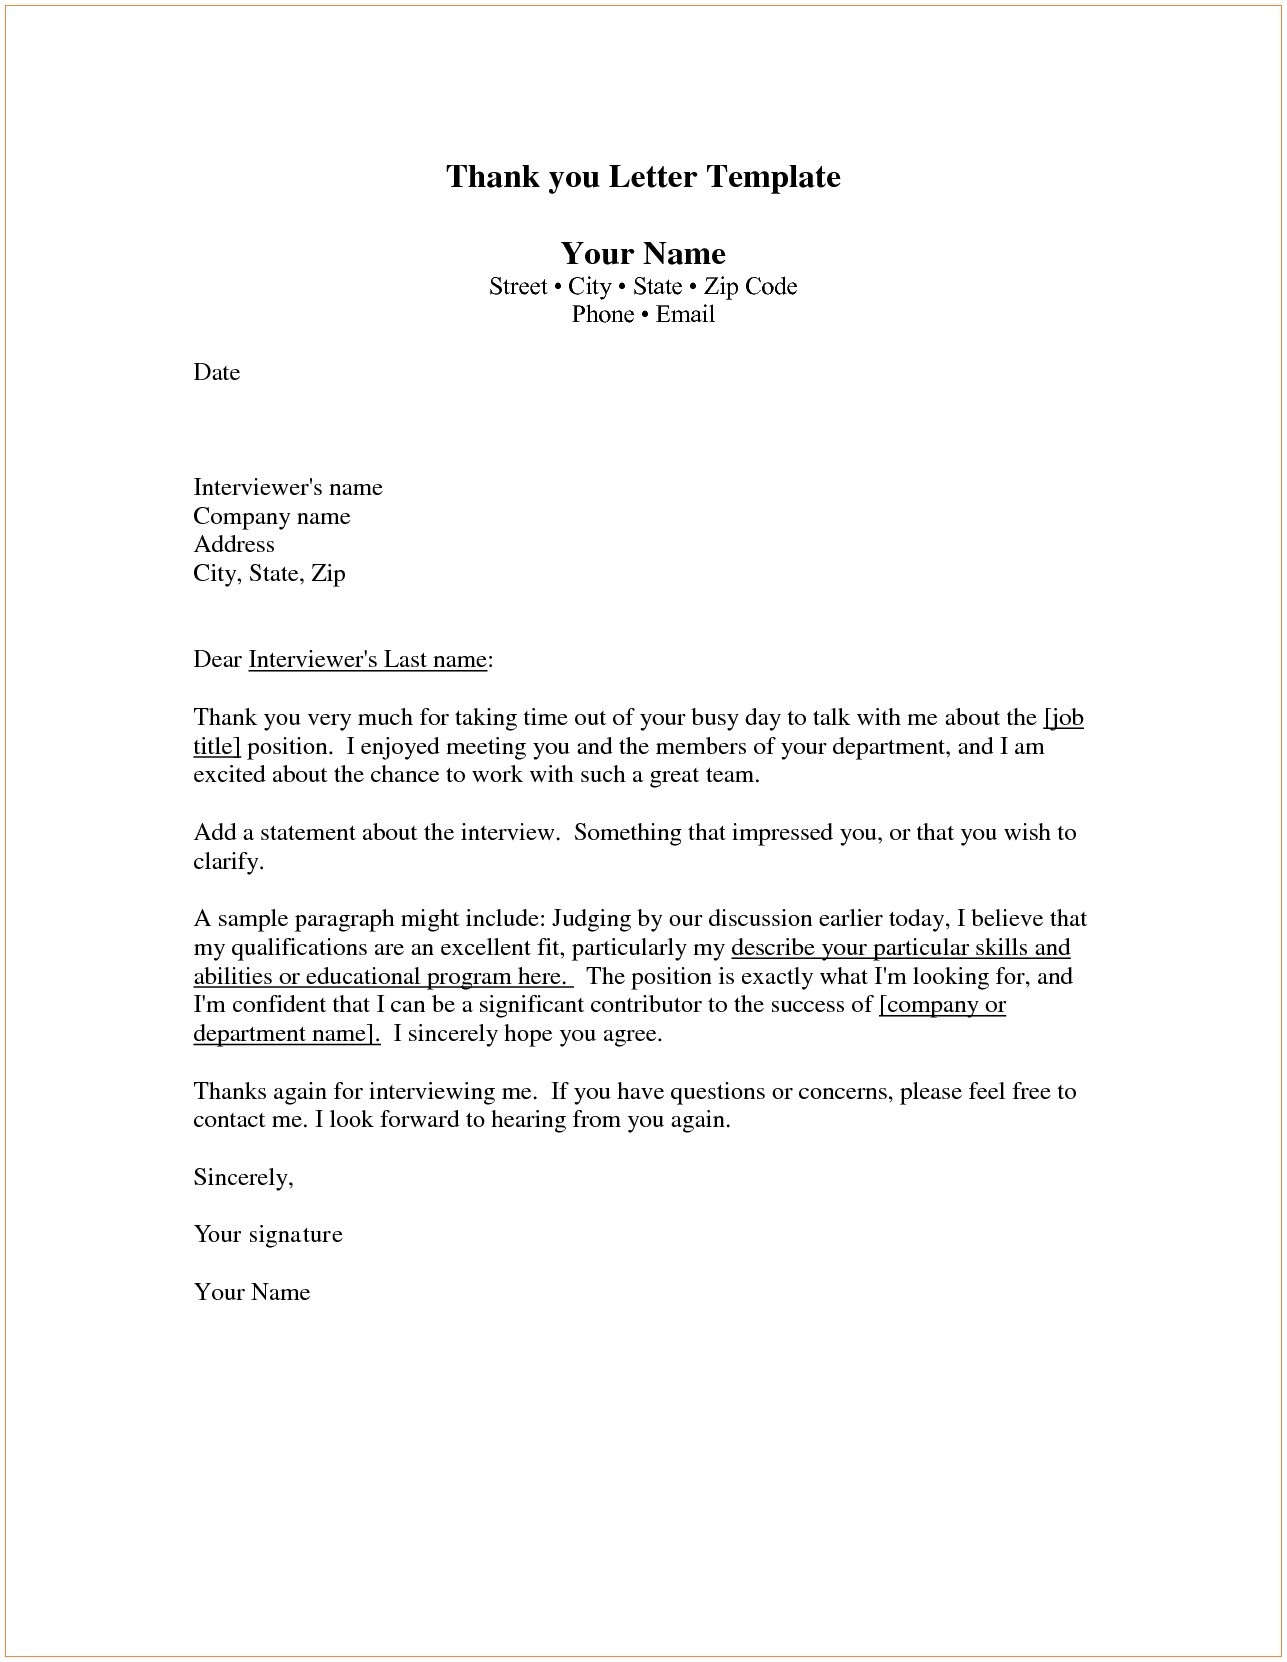 Thank You Letter Business Template - Thank You for Your Business Letter Template Save Http Jobsearch